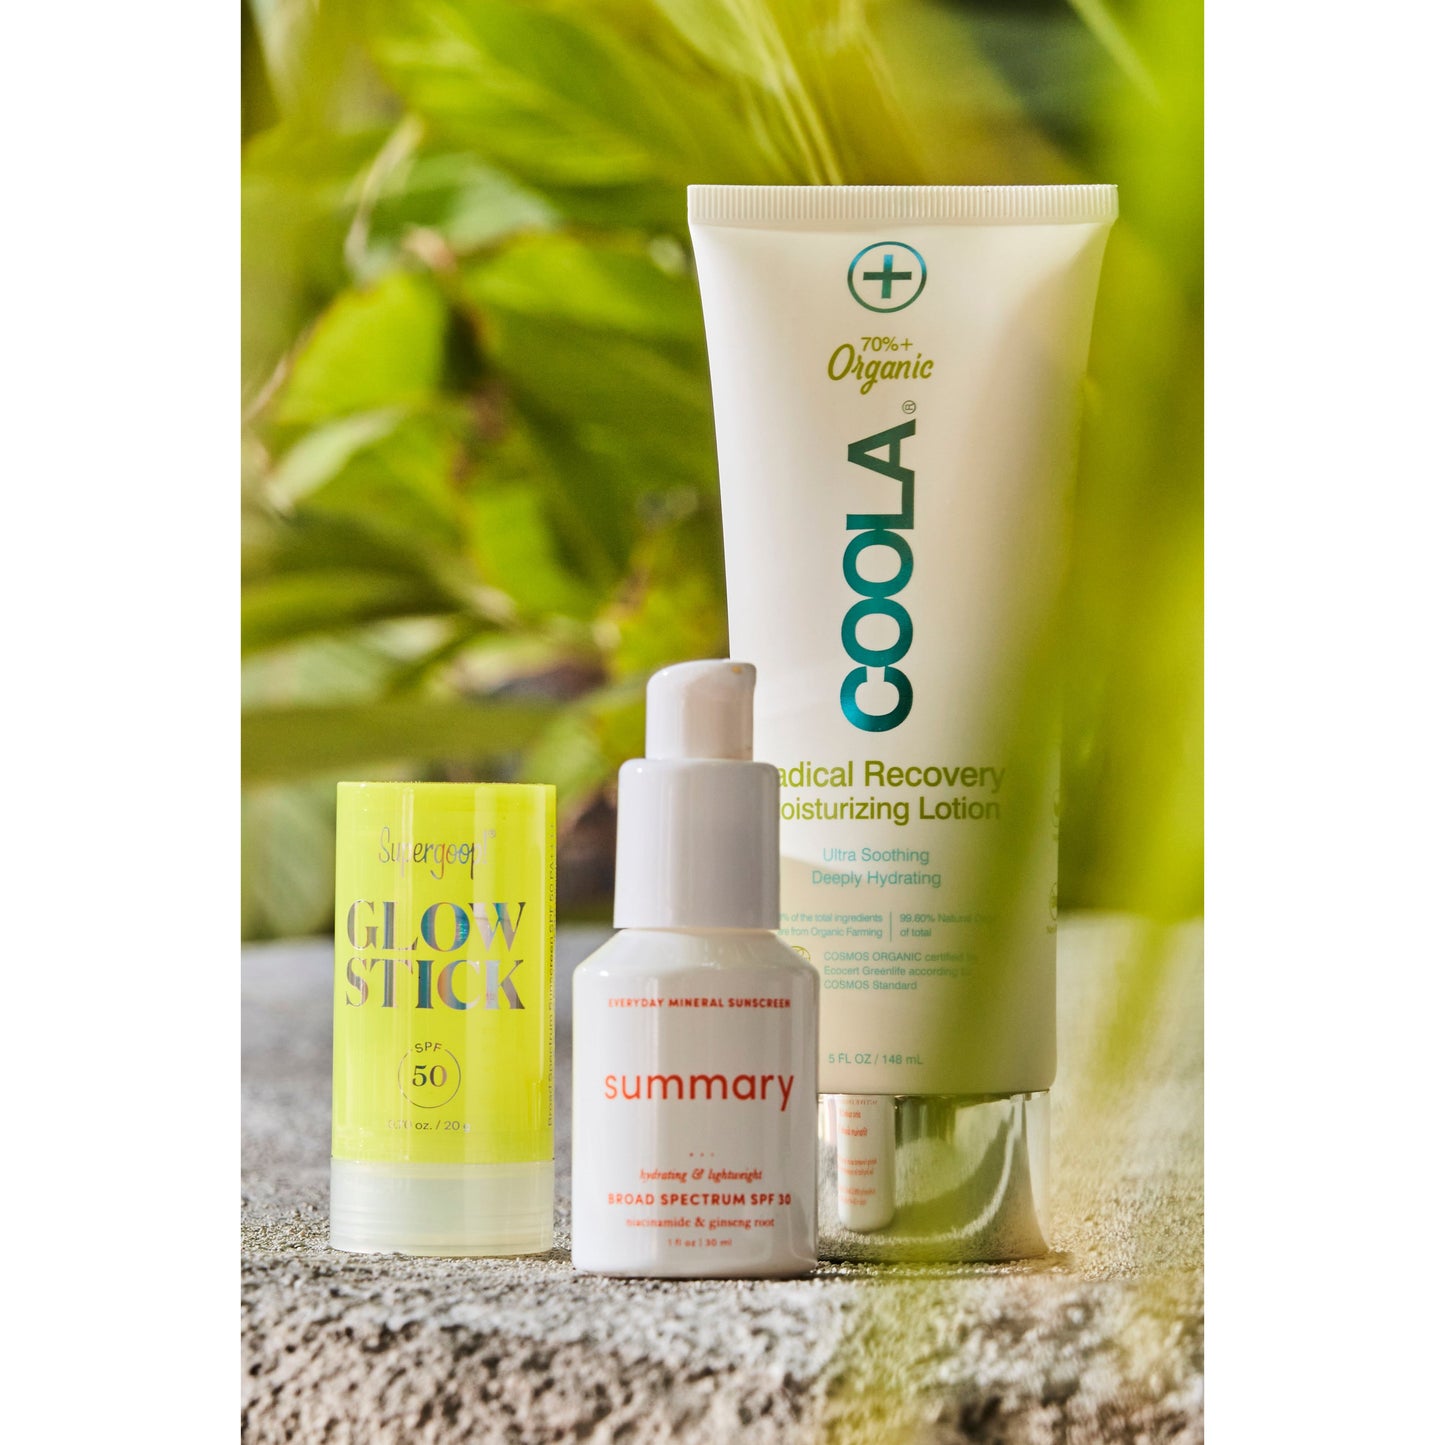 Three skincare products by Coola and Supergoop, including a mineral-based sunscreen, displayed on a natural stone surface, surrounded by lush greenery.